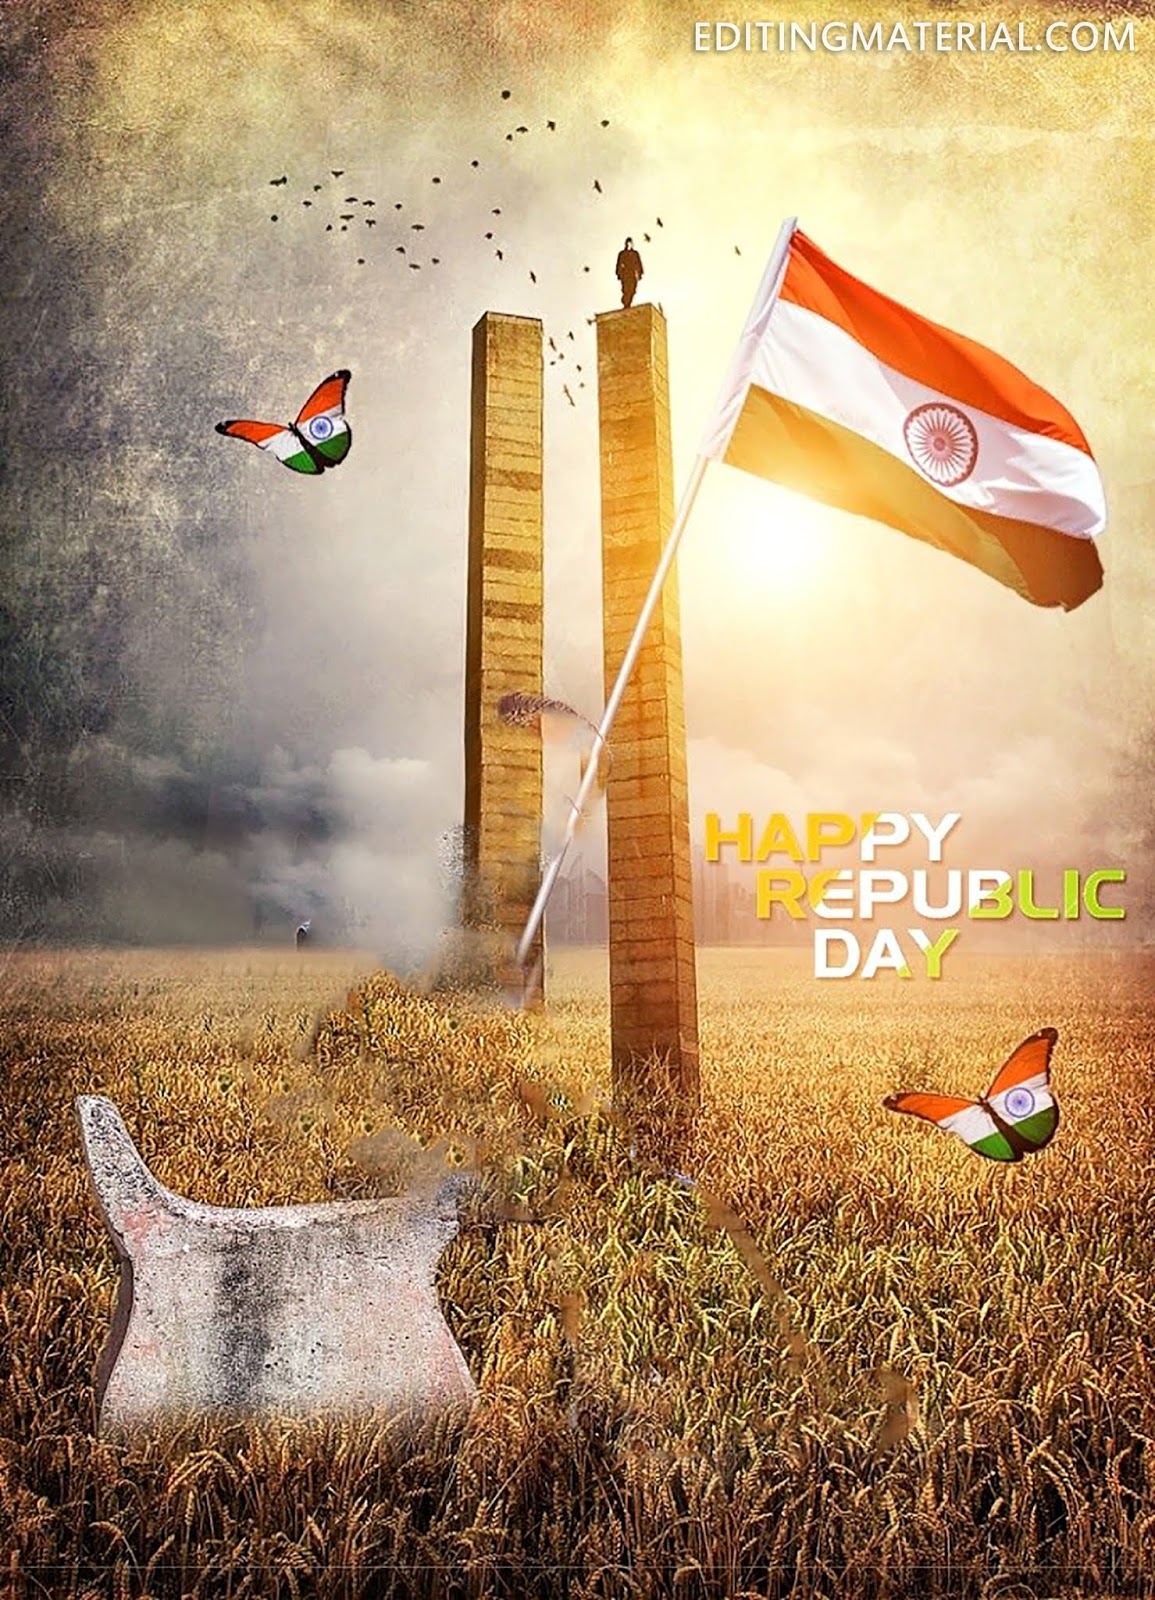 26 January 2019 photo editing backgrounds for Picsart and photoshop, Picsart  photo editing background republic day Editing|